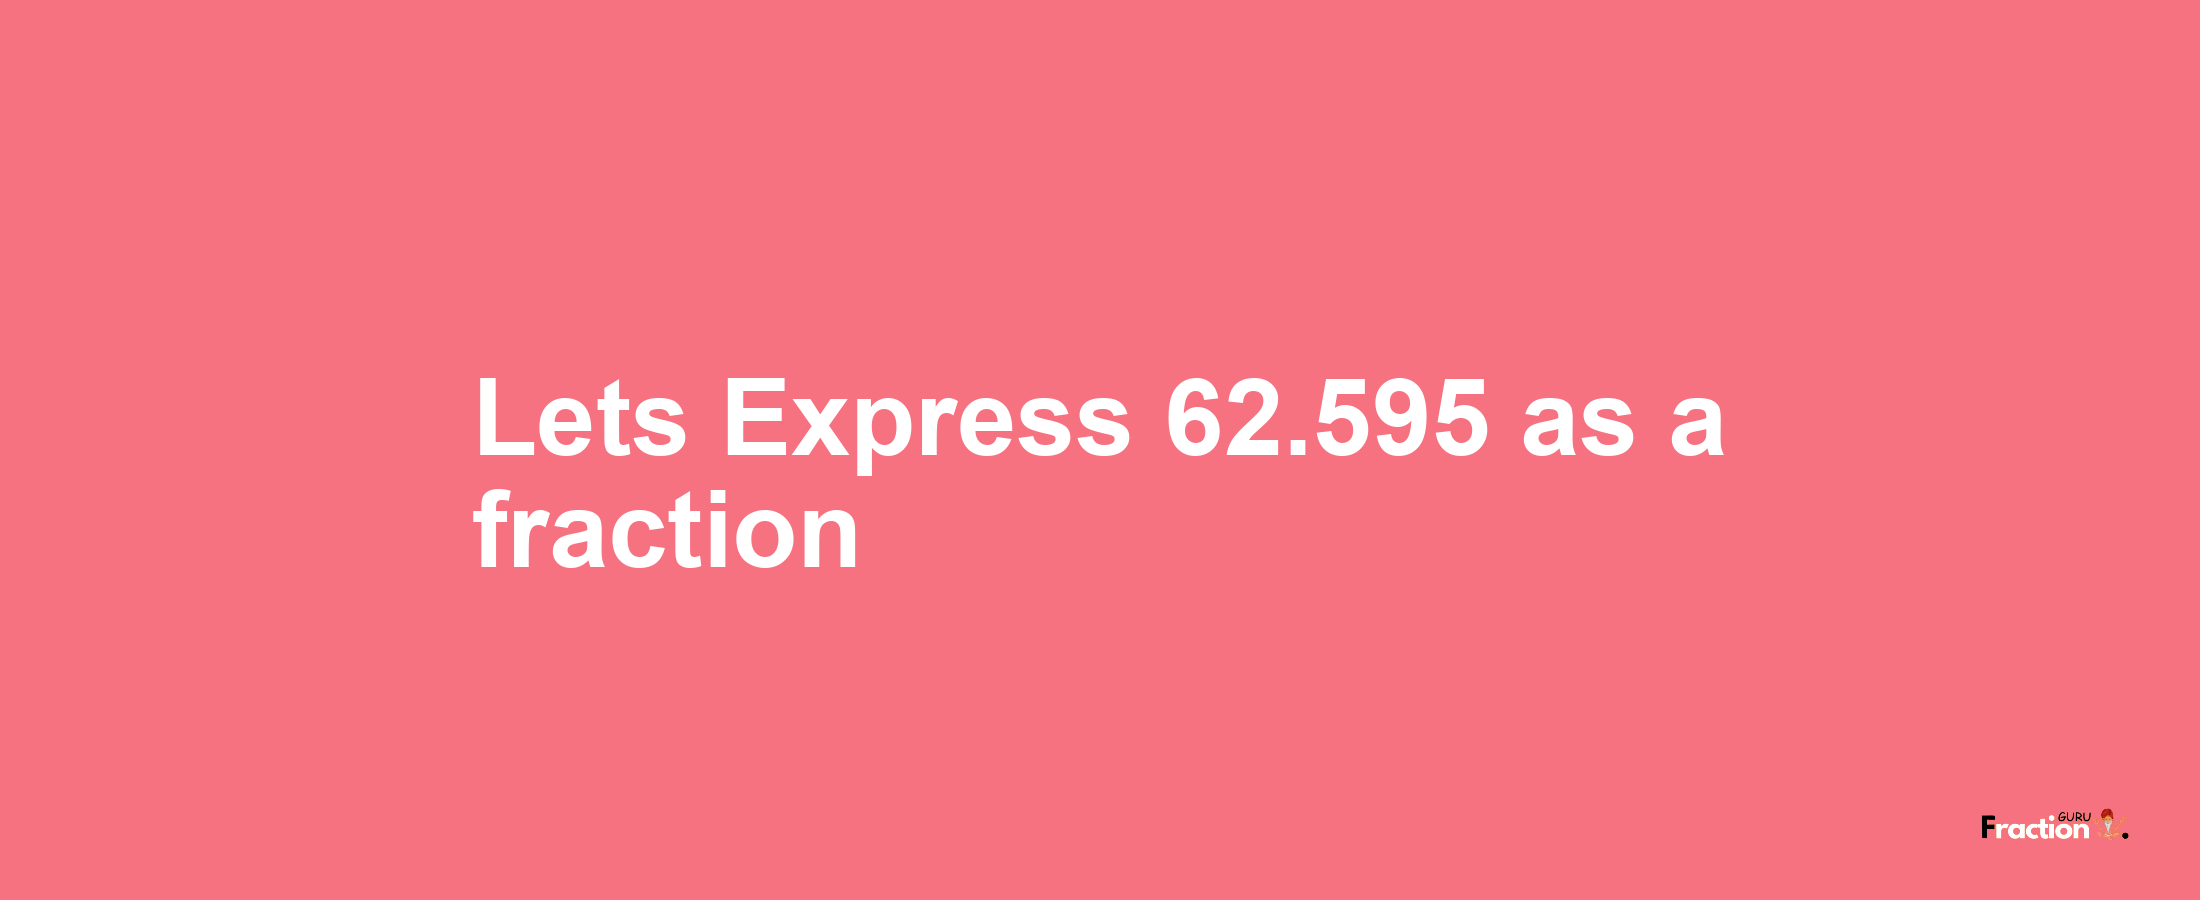 Lets Express 62.595 as afraction